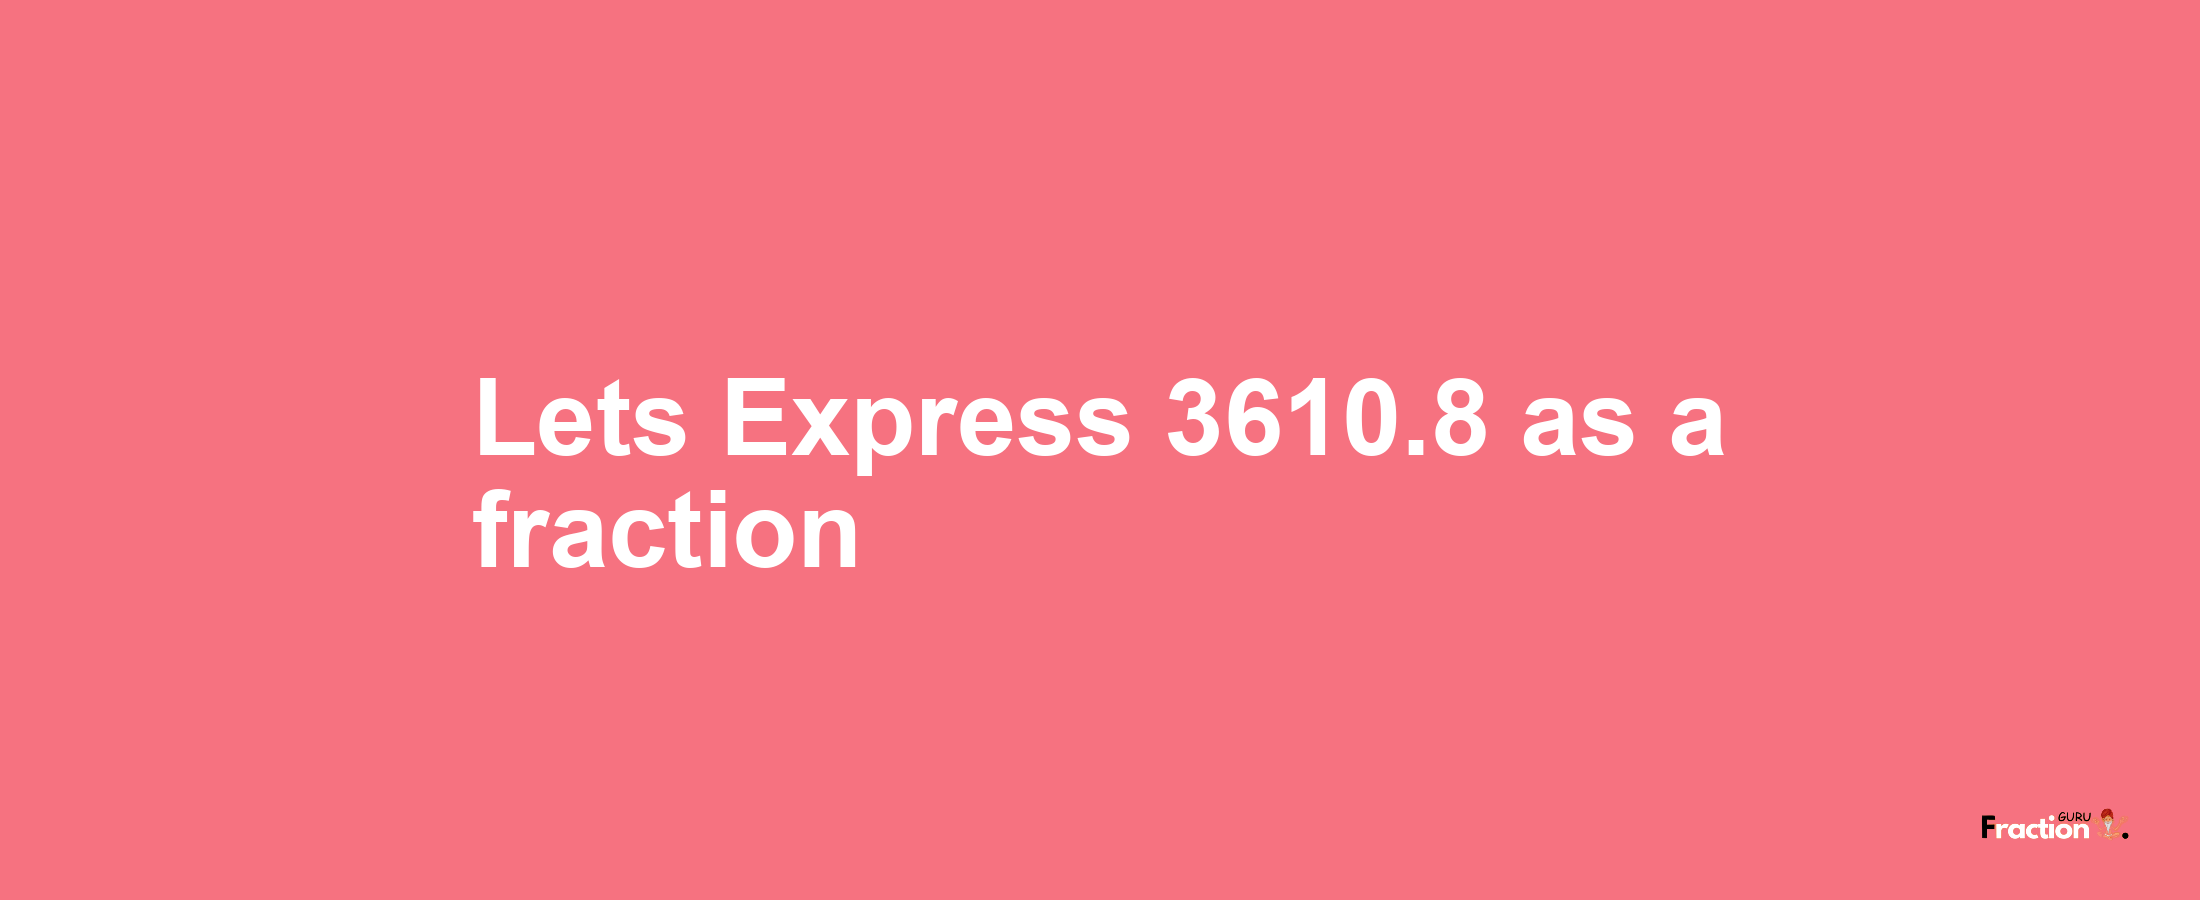 Lets Express 3610.8 as afraction